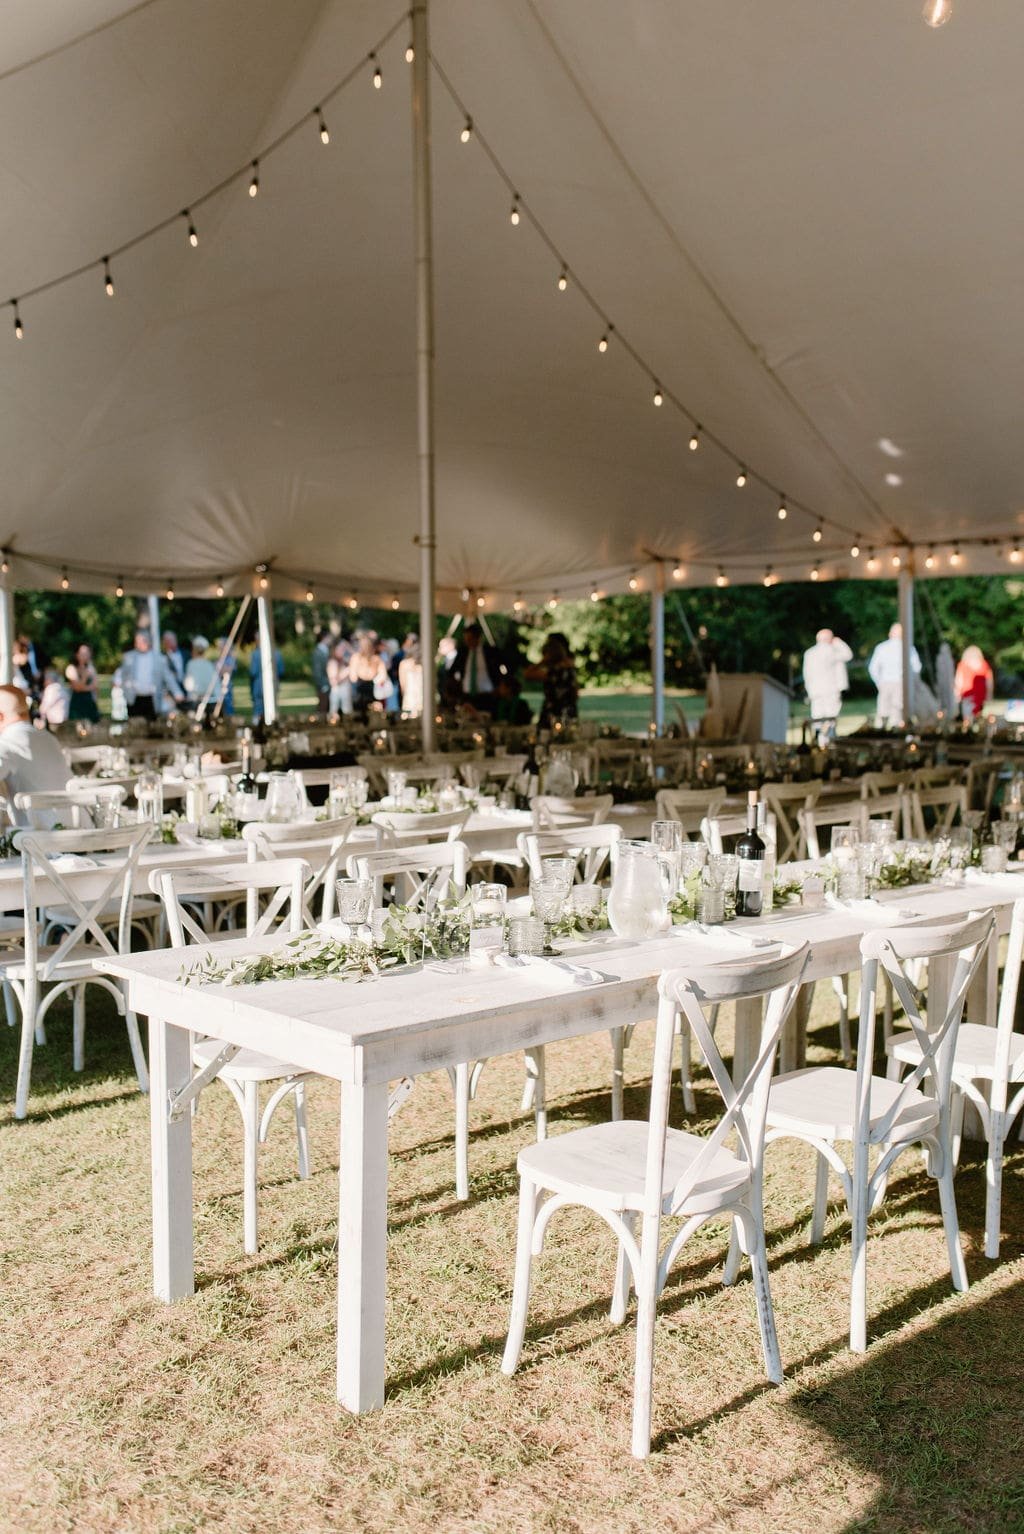 Tented wedding reception decor with white wood tables and chairs